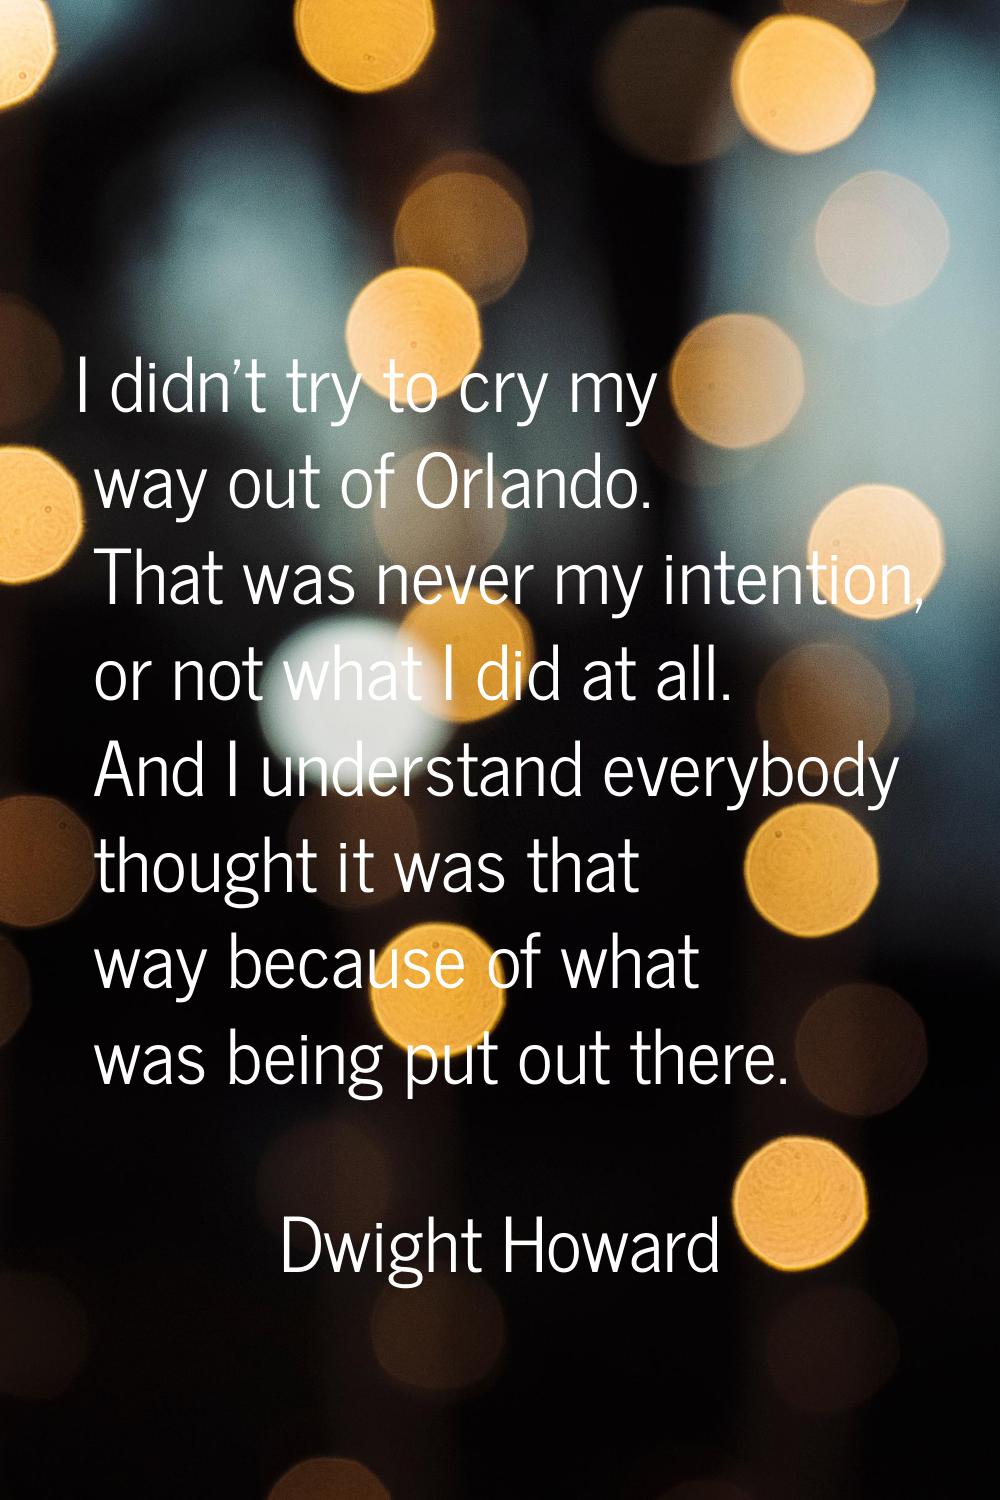 I didn't try to cry my way out of Orlando. That was never my intention, or not what I did at all. A